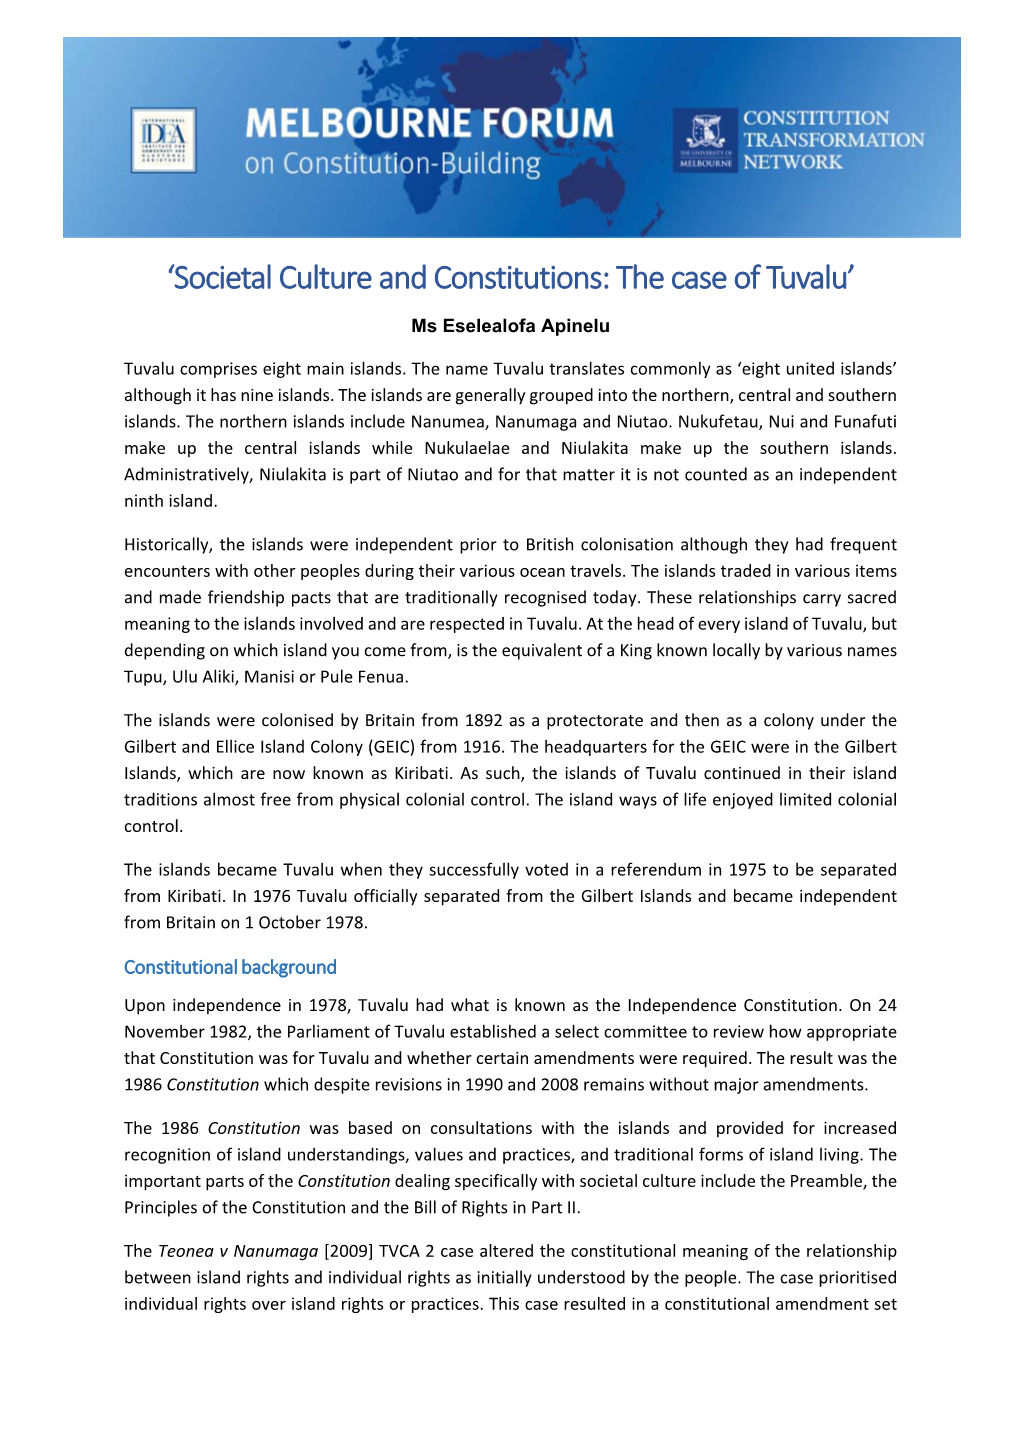 'Societal Culture and Constitutions: the Case of Tuvalu'